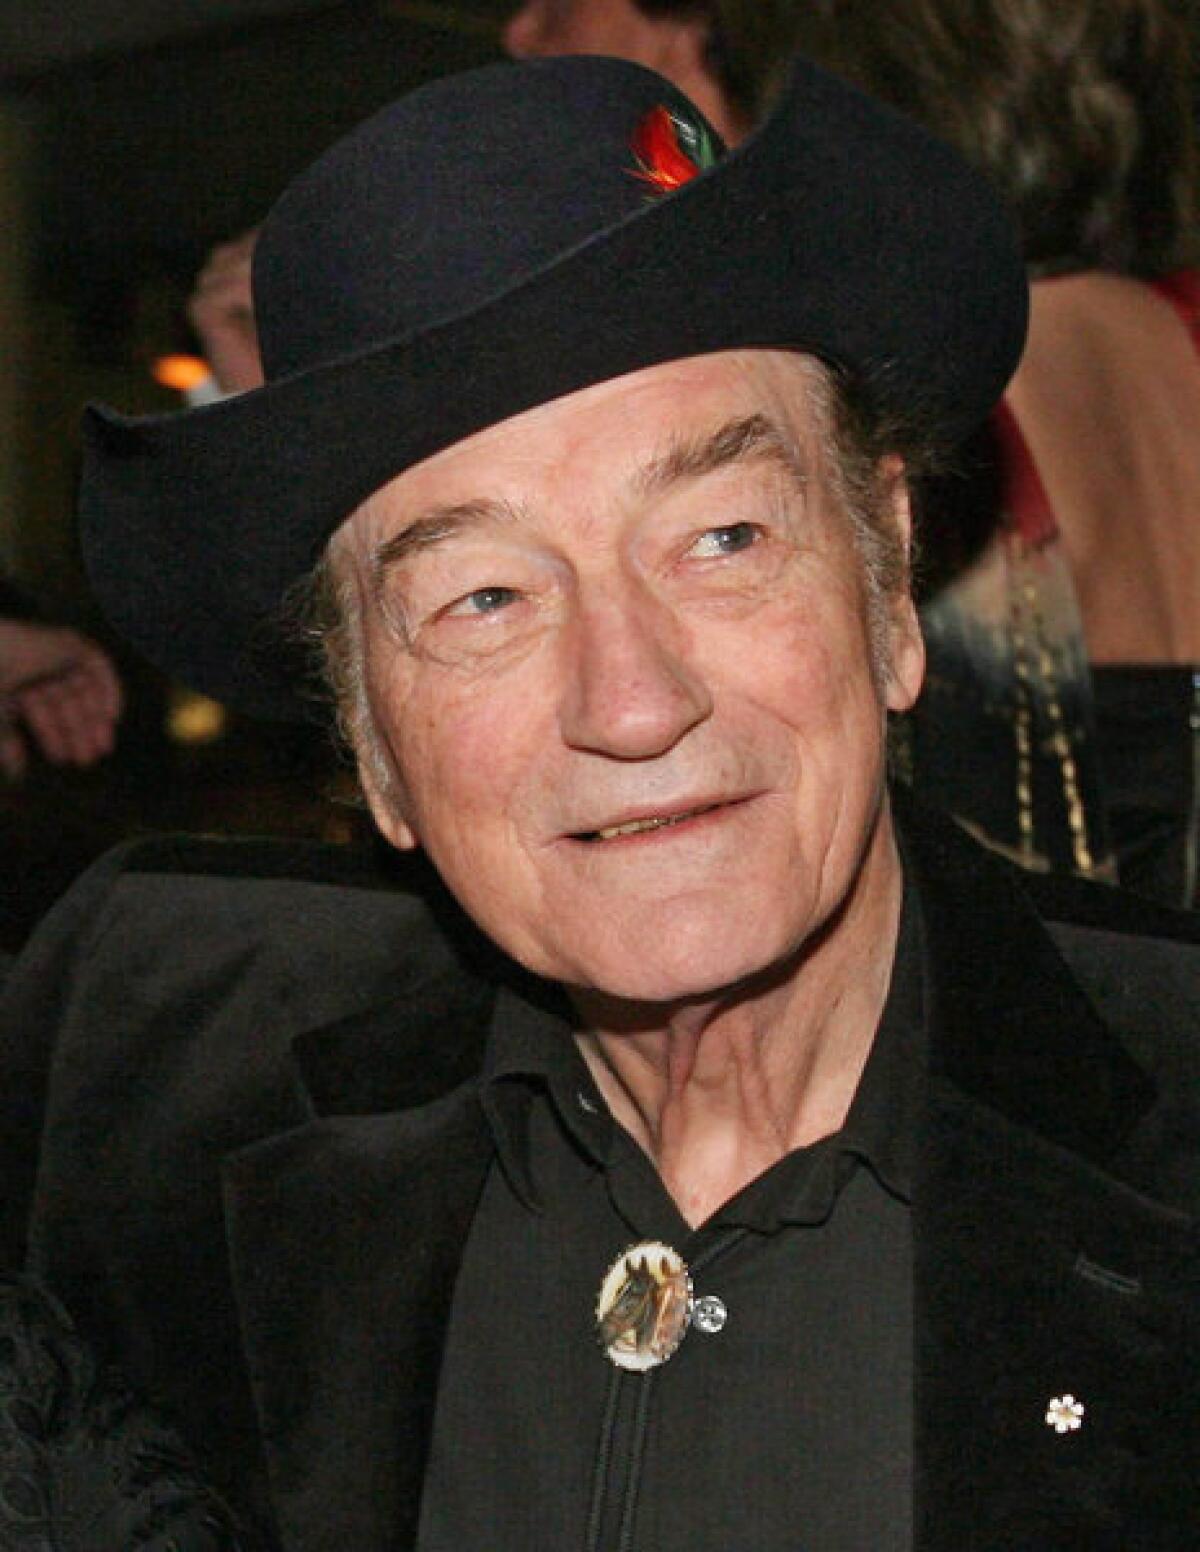 Canadian music legend Stompin' Tom Connors before the 20th annual SOCAN Awards gala in Toronto.